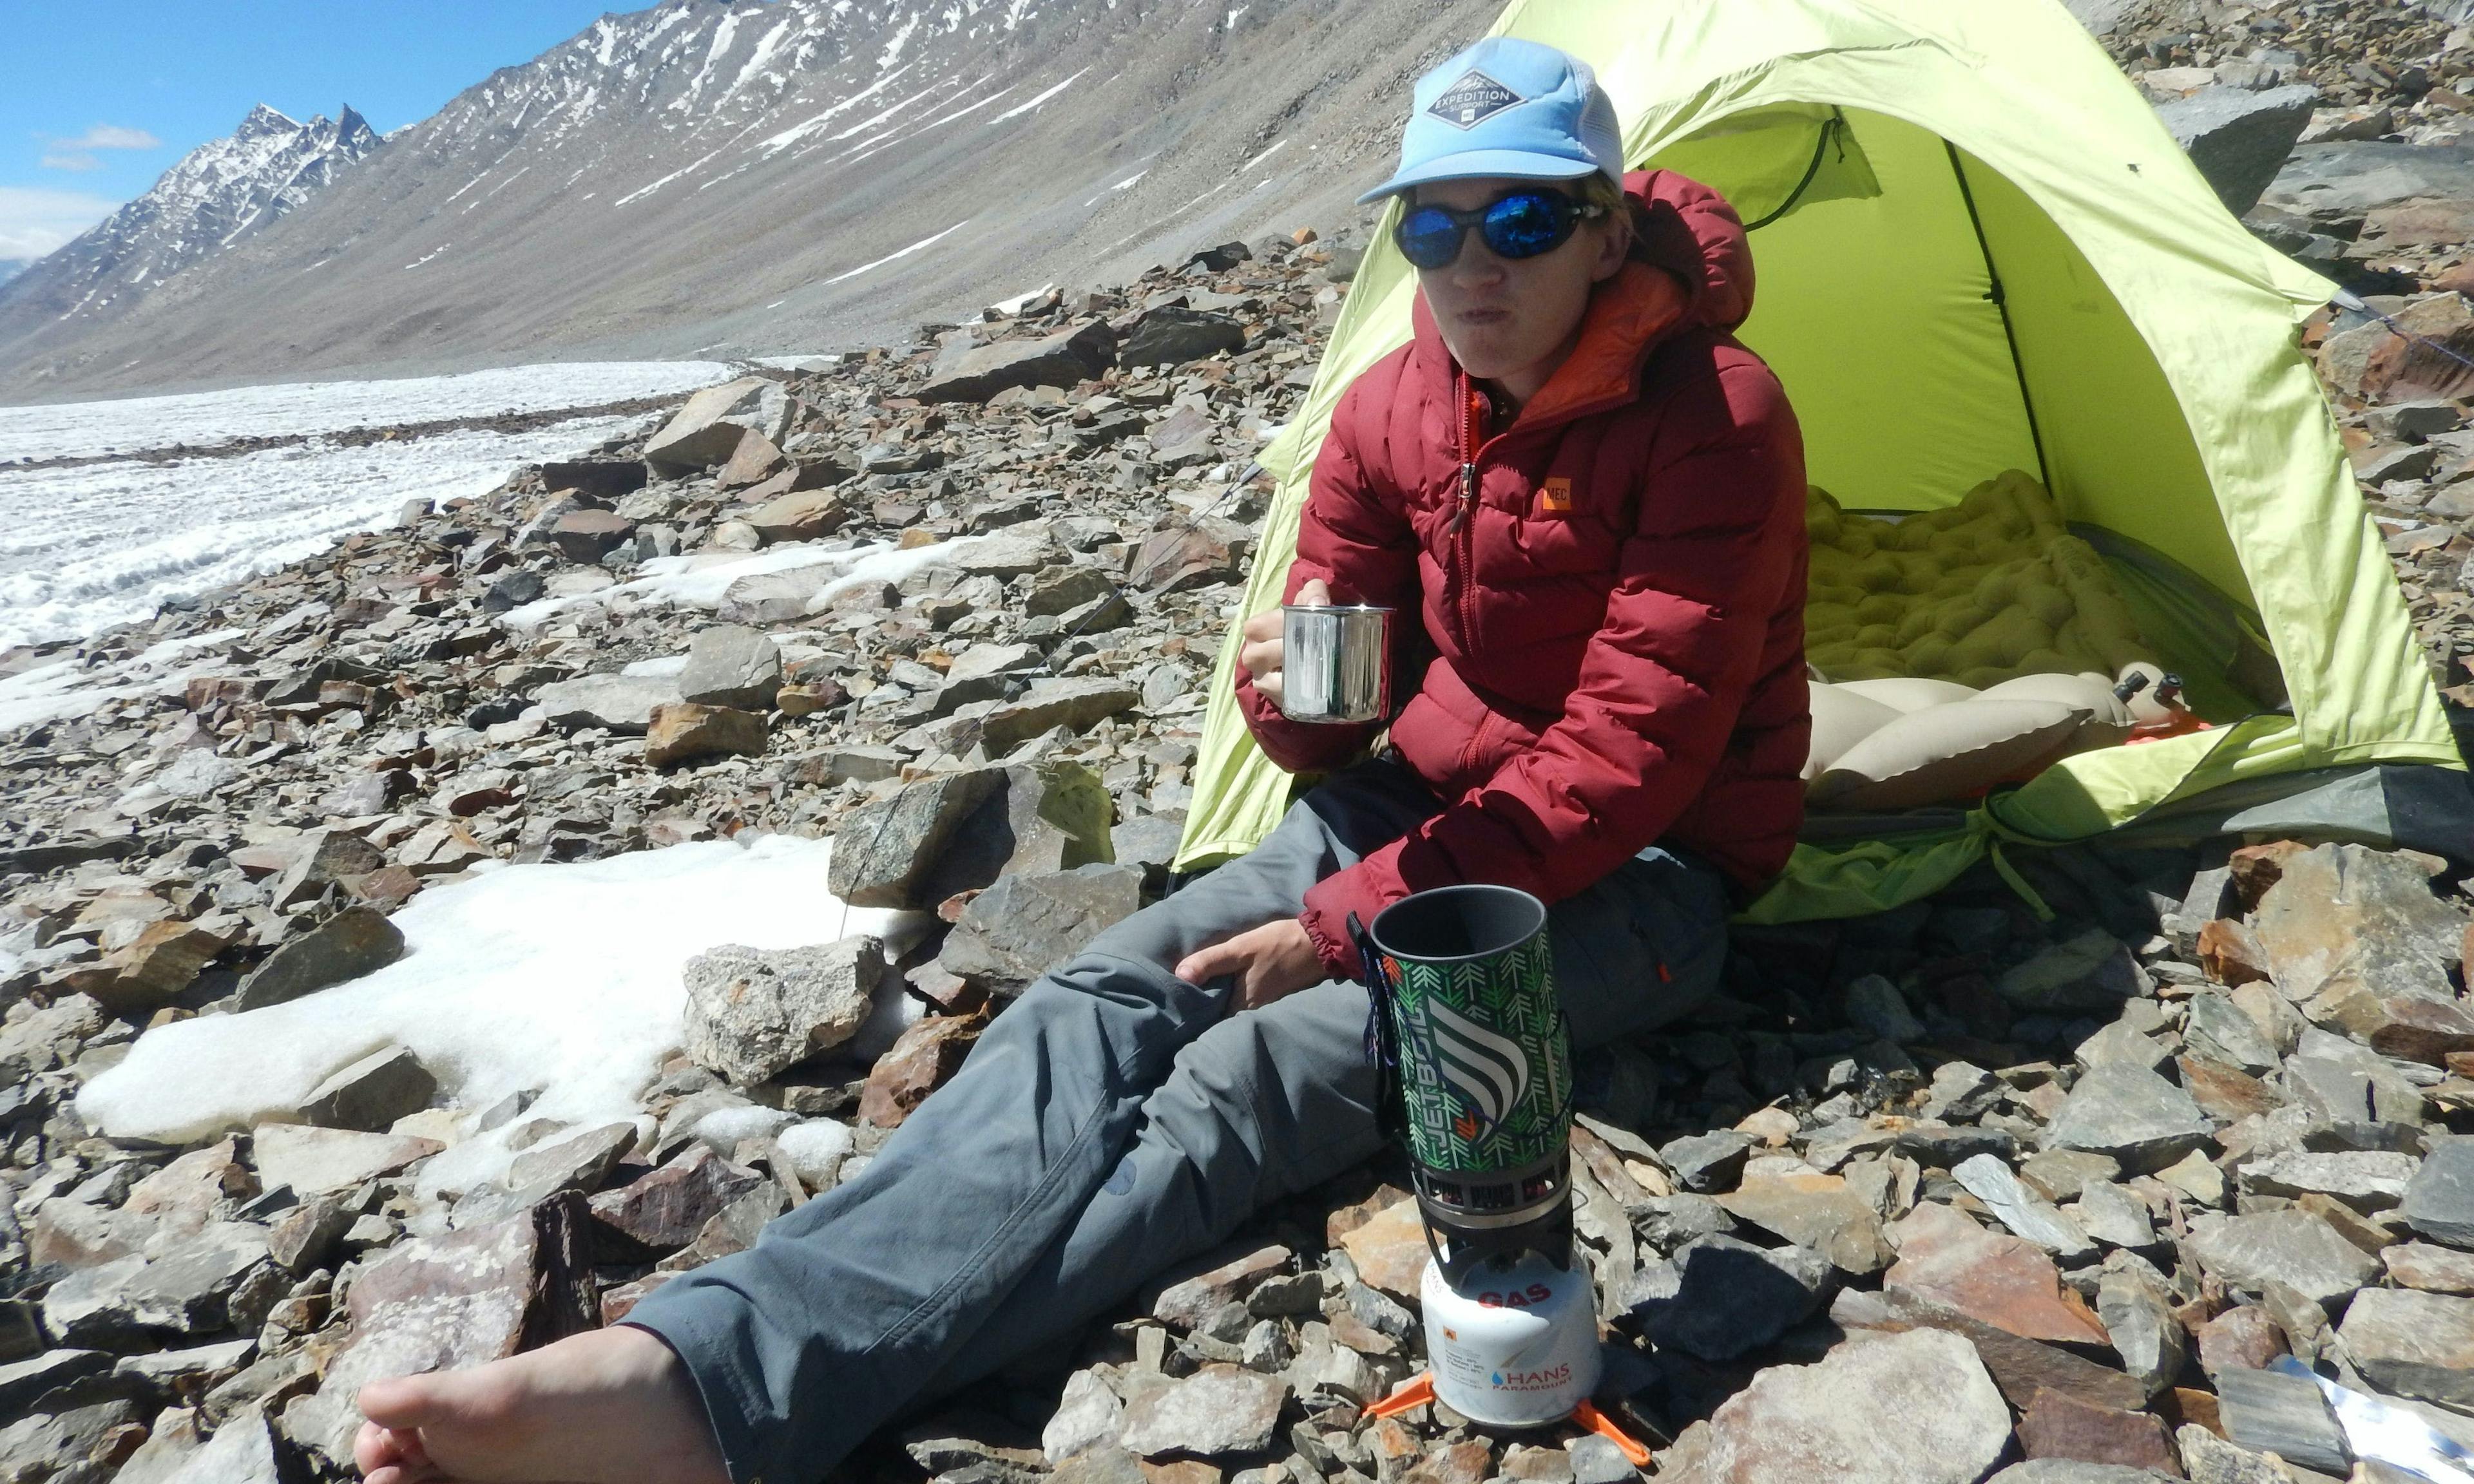 Climber sitting next to a small tent and sipping a hot drink from a coffee mug